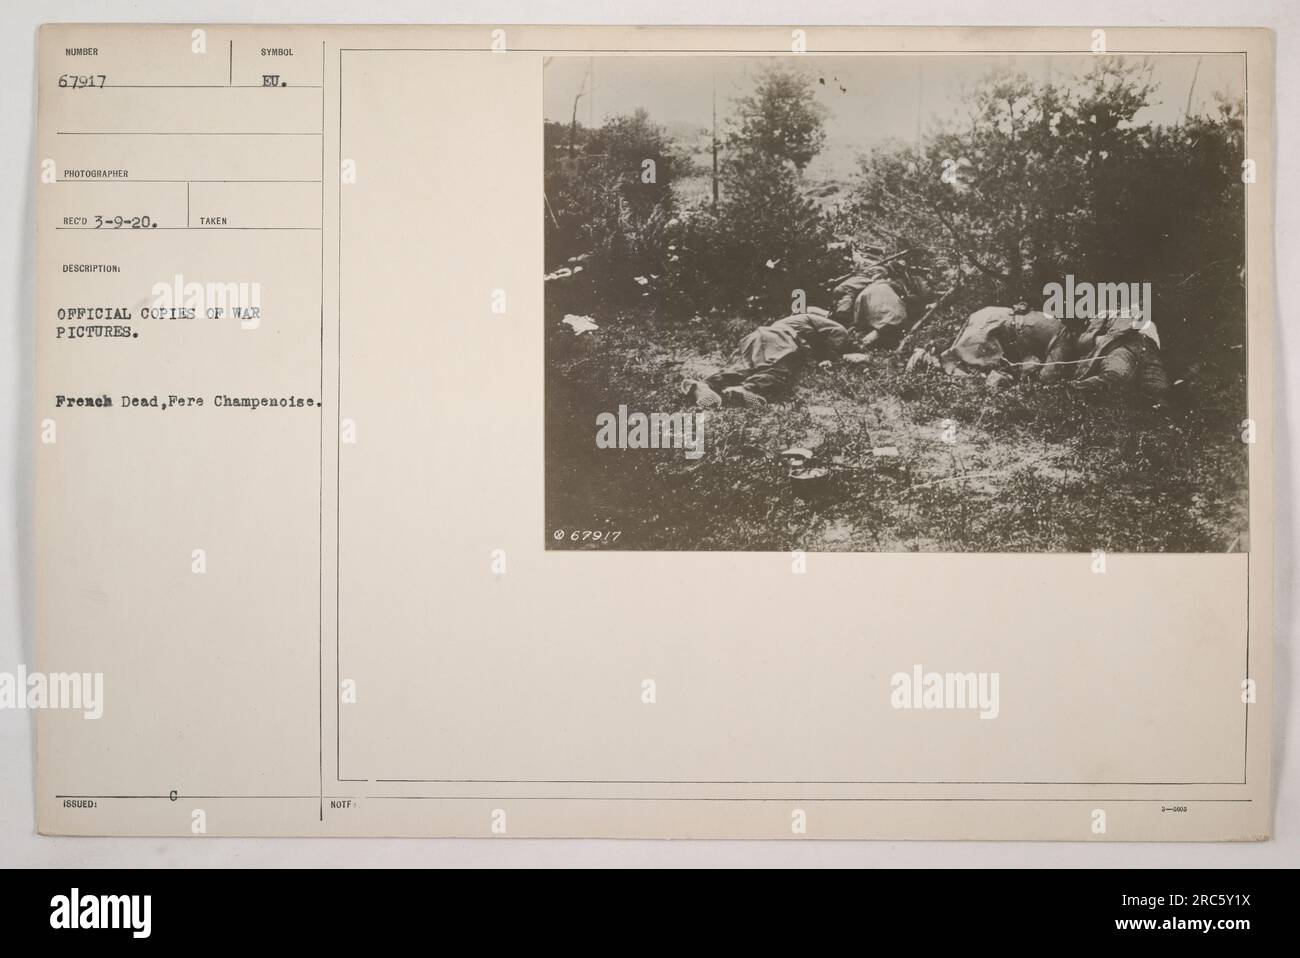 This photograph, numbered 67917, was taken by a Canadian photographer in Fere Champenoise during World War I. The image depicts French soldiers who were killed in action. It is an official copy of a war picture, with the official symbol of the European Union. The photograph was issued with the description 'French Dead, Fere Champenoise.' Stock Photo